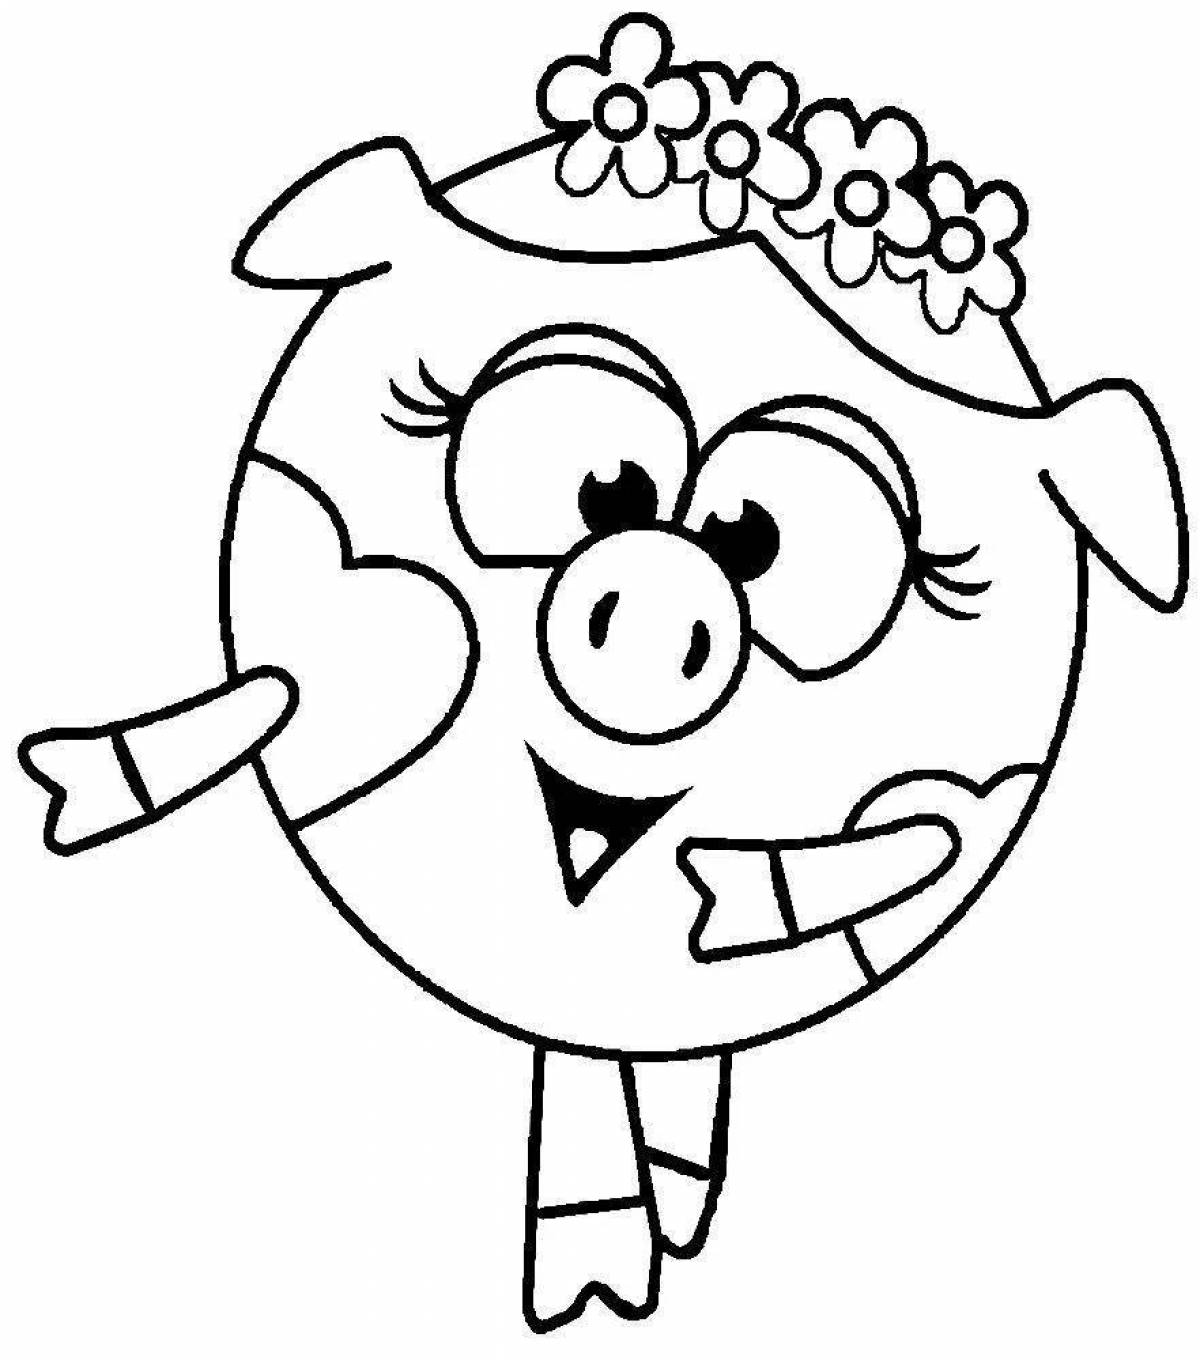 Smeshariki children's coloring pages filled with colors